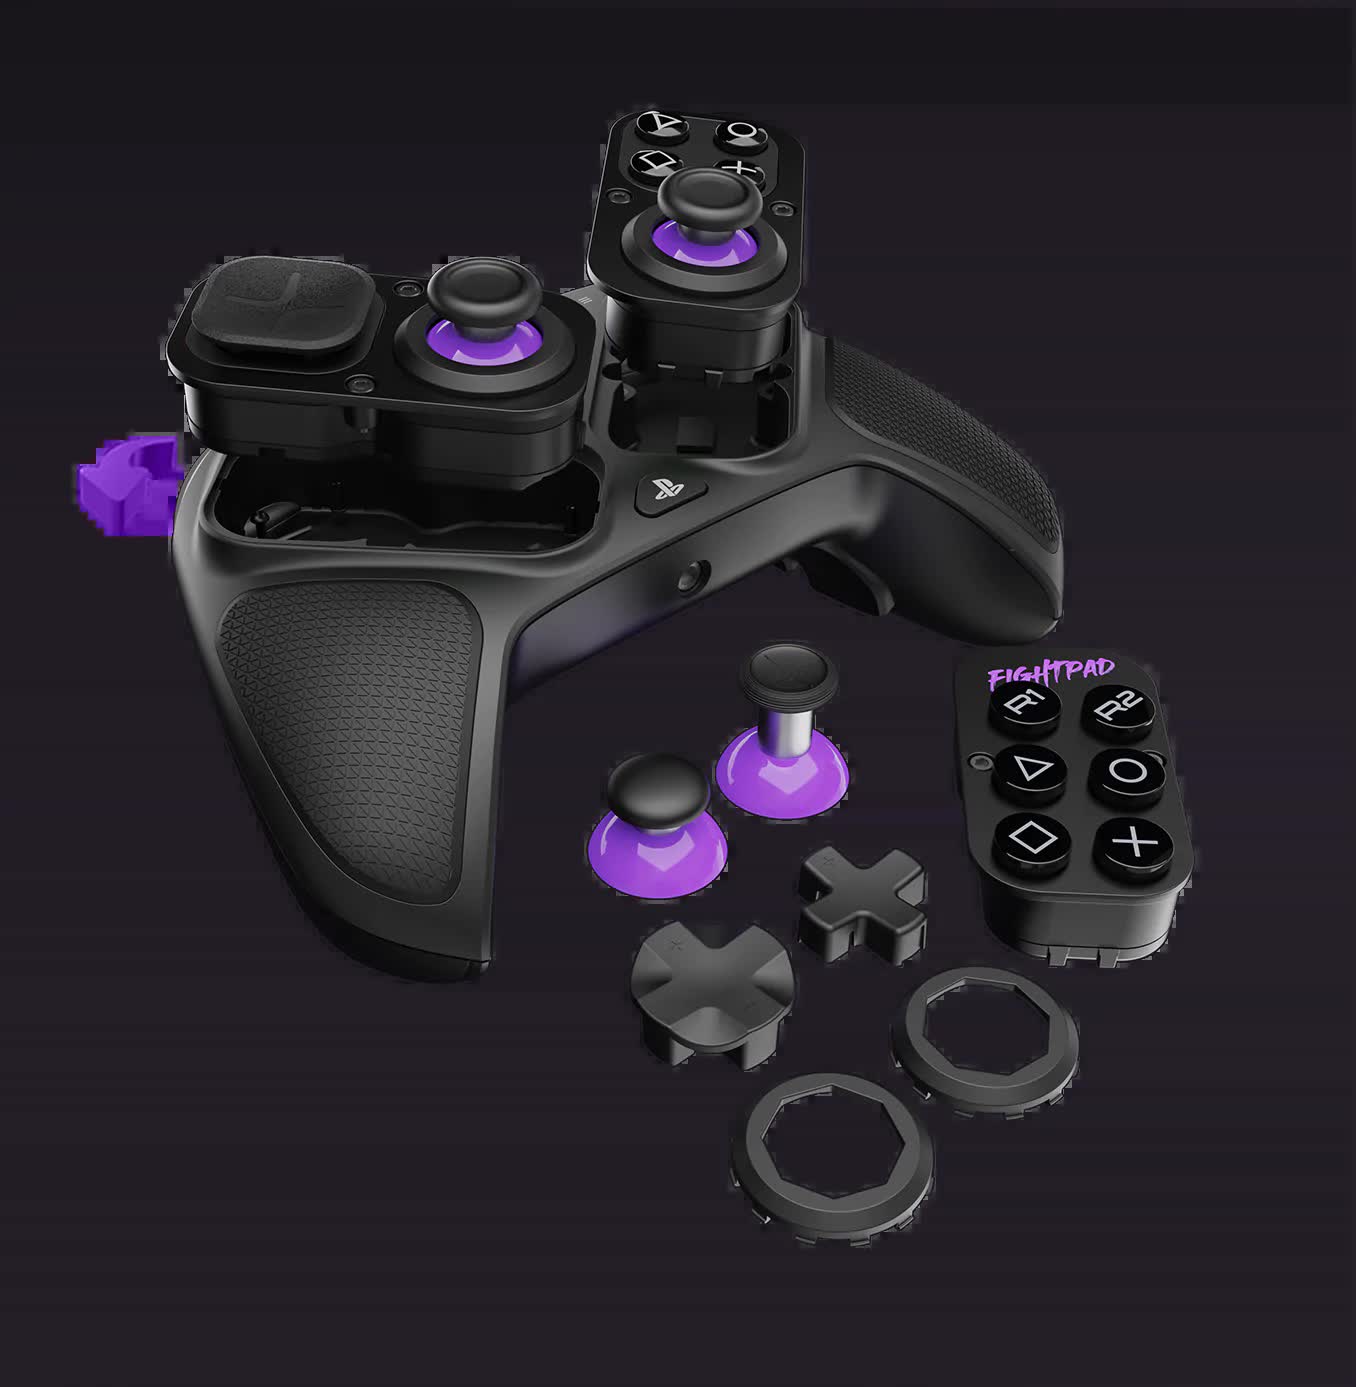 The BFG Pro PC/PlayStation modular controller is incredibly customizable